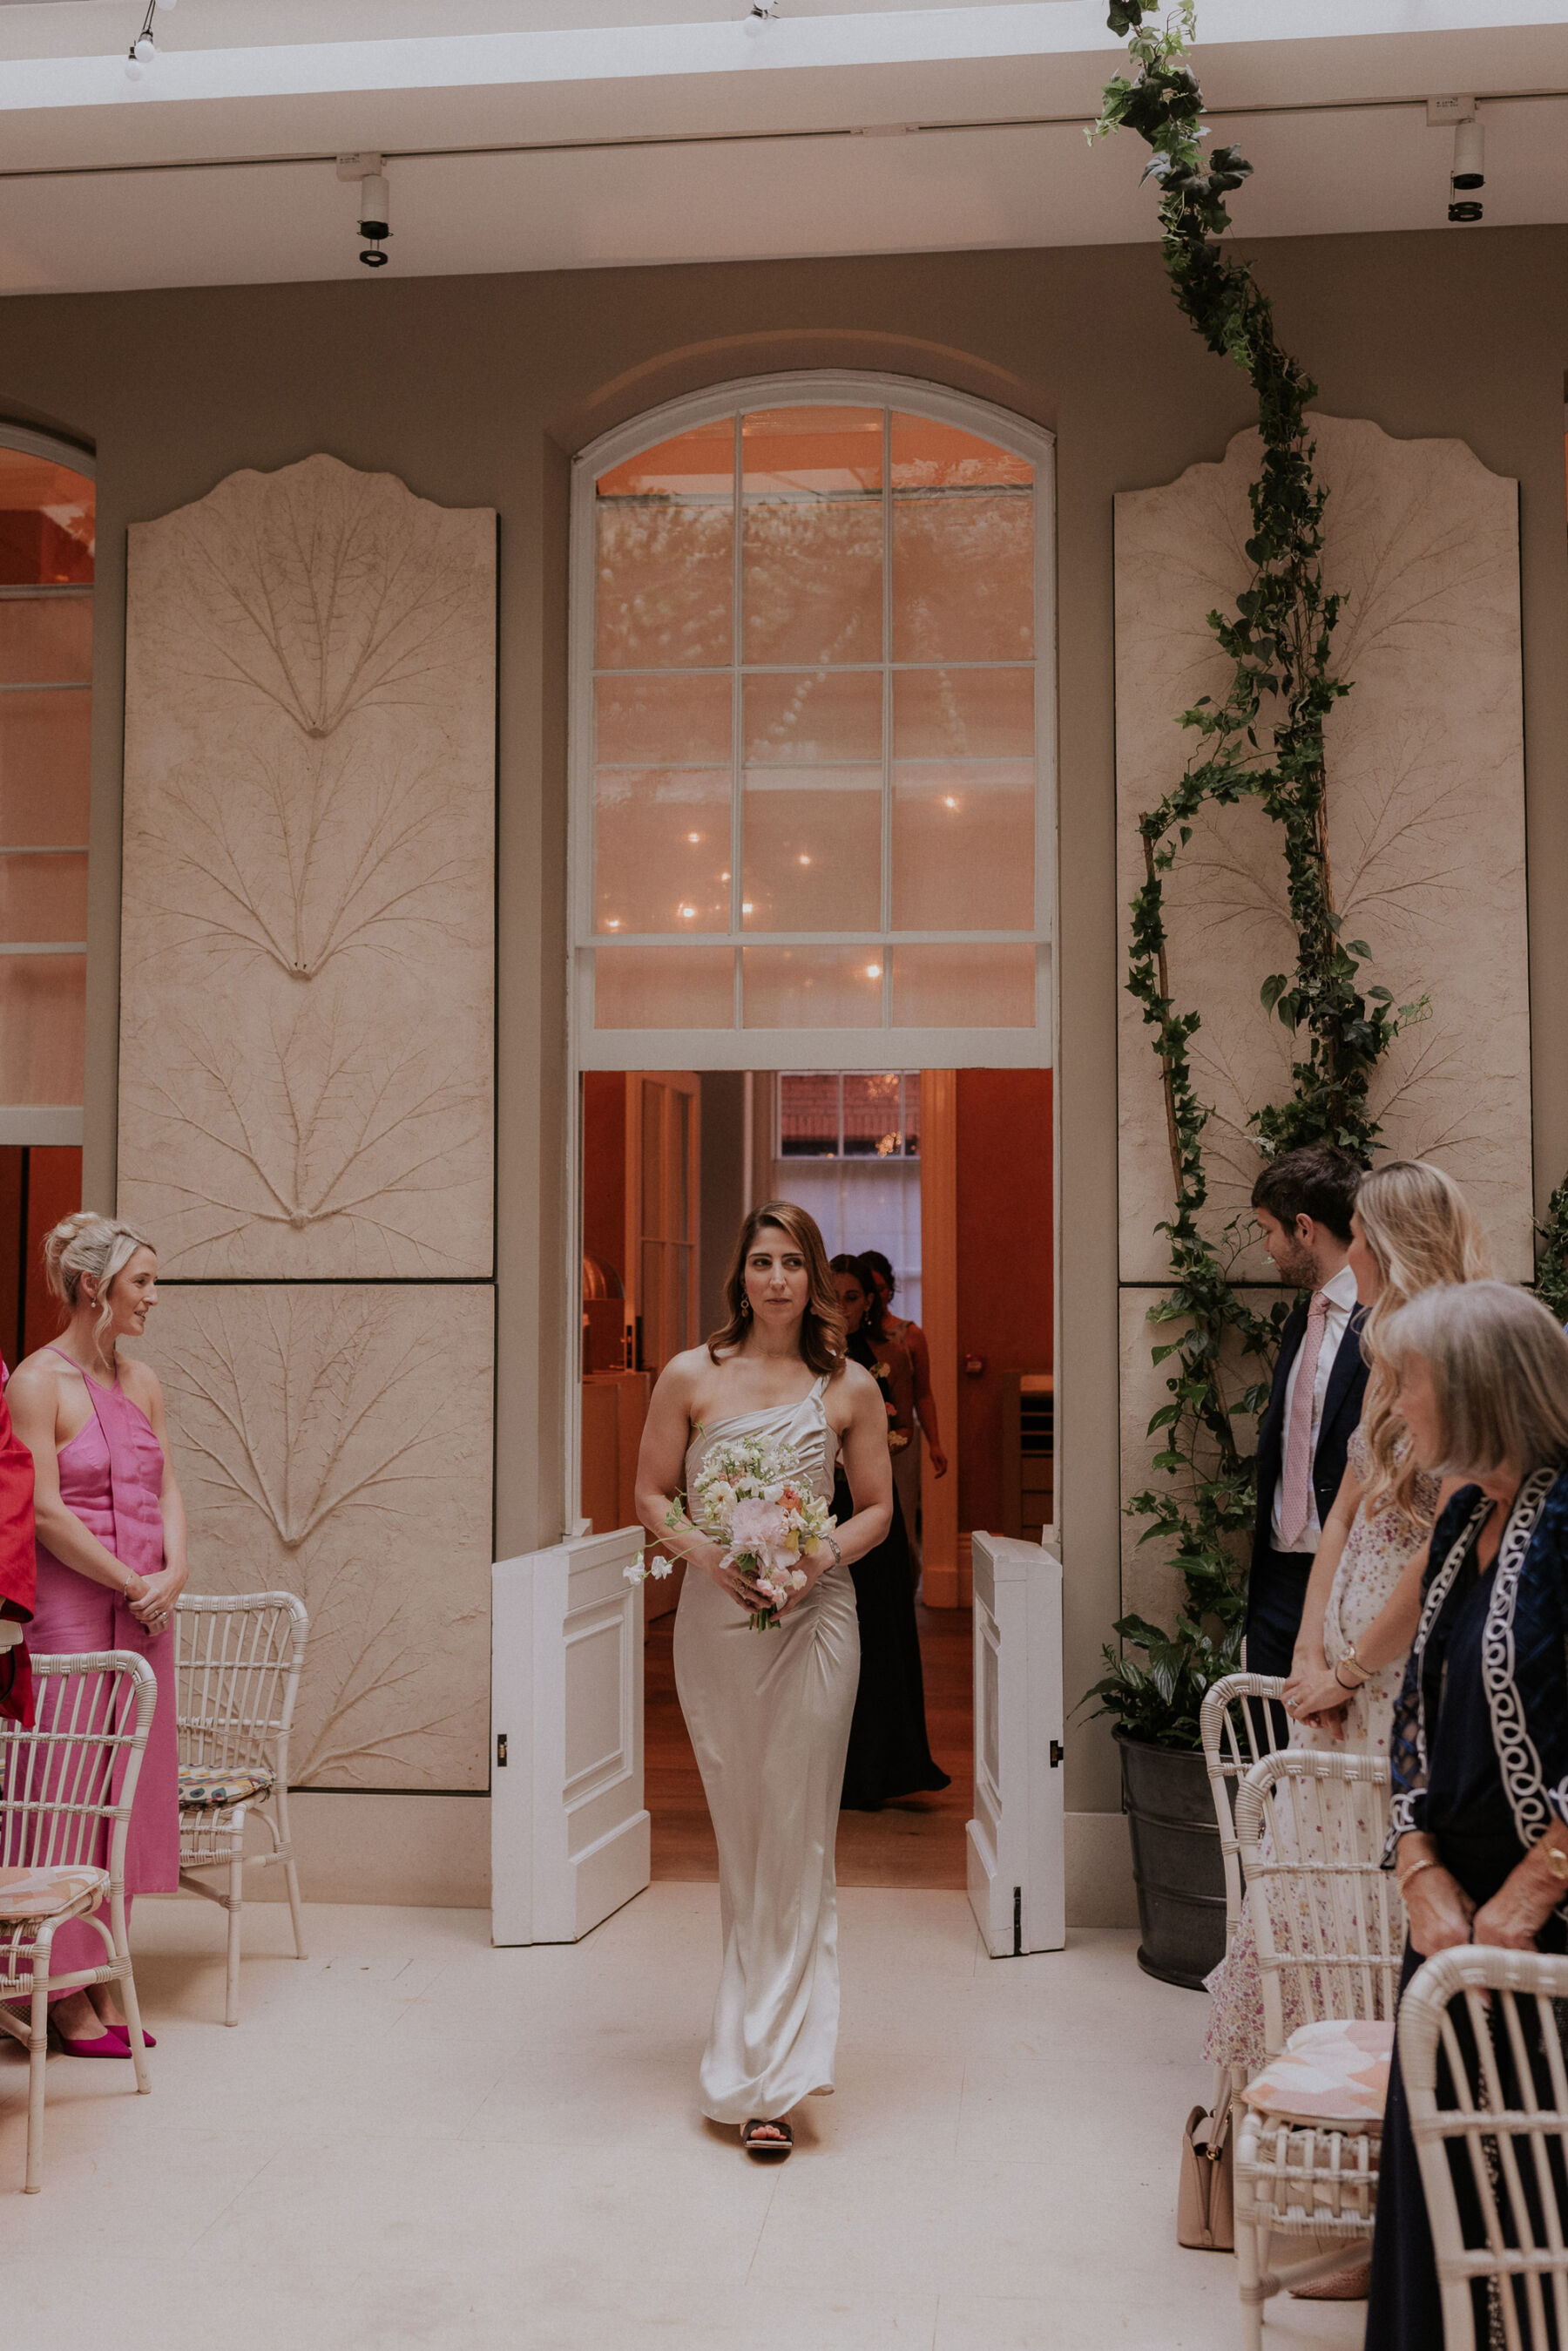 Bridesmaids arriving at the ceremony at Spring Restaurant wedding venue. Maja Tsolo Photography.